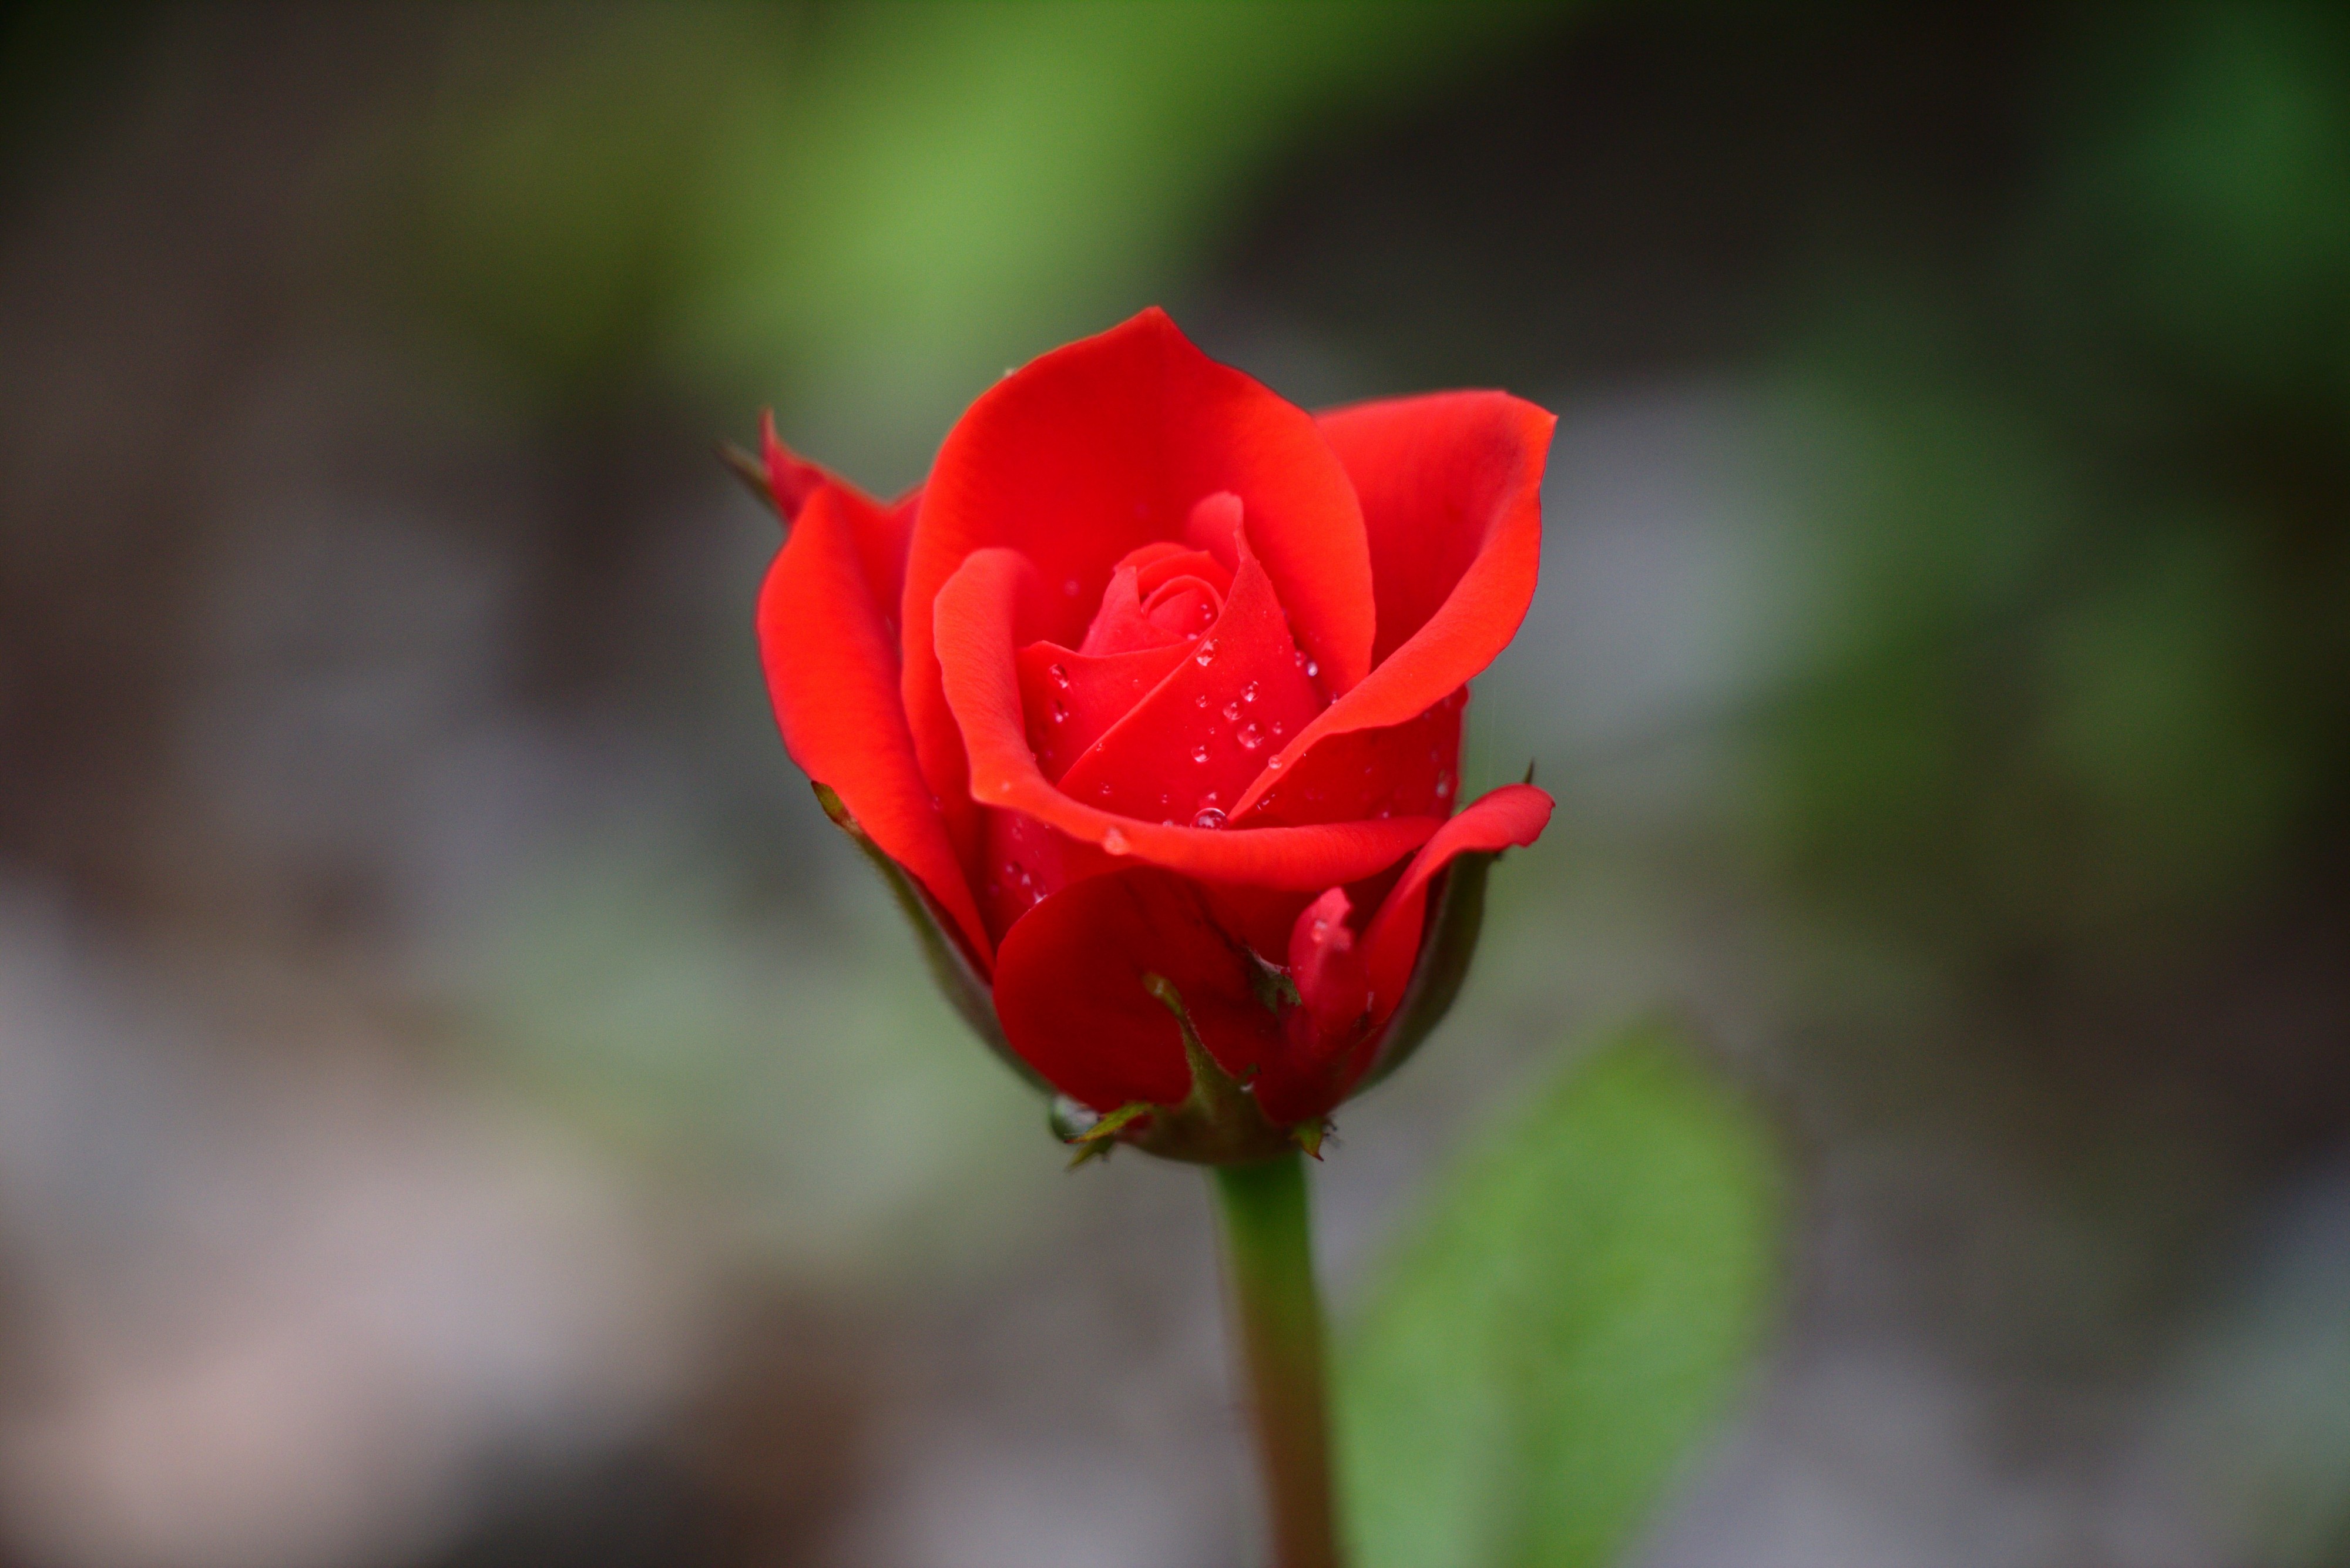 Red Rose (Rosa) With Water Droplets